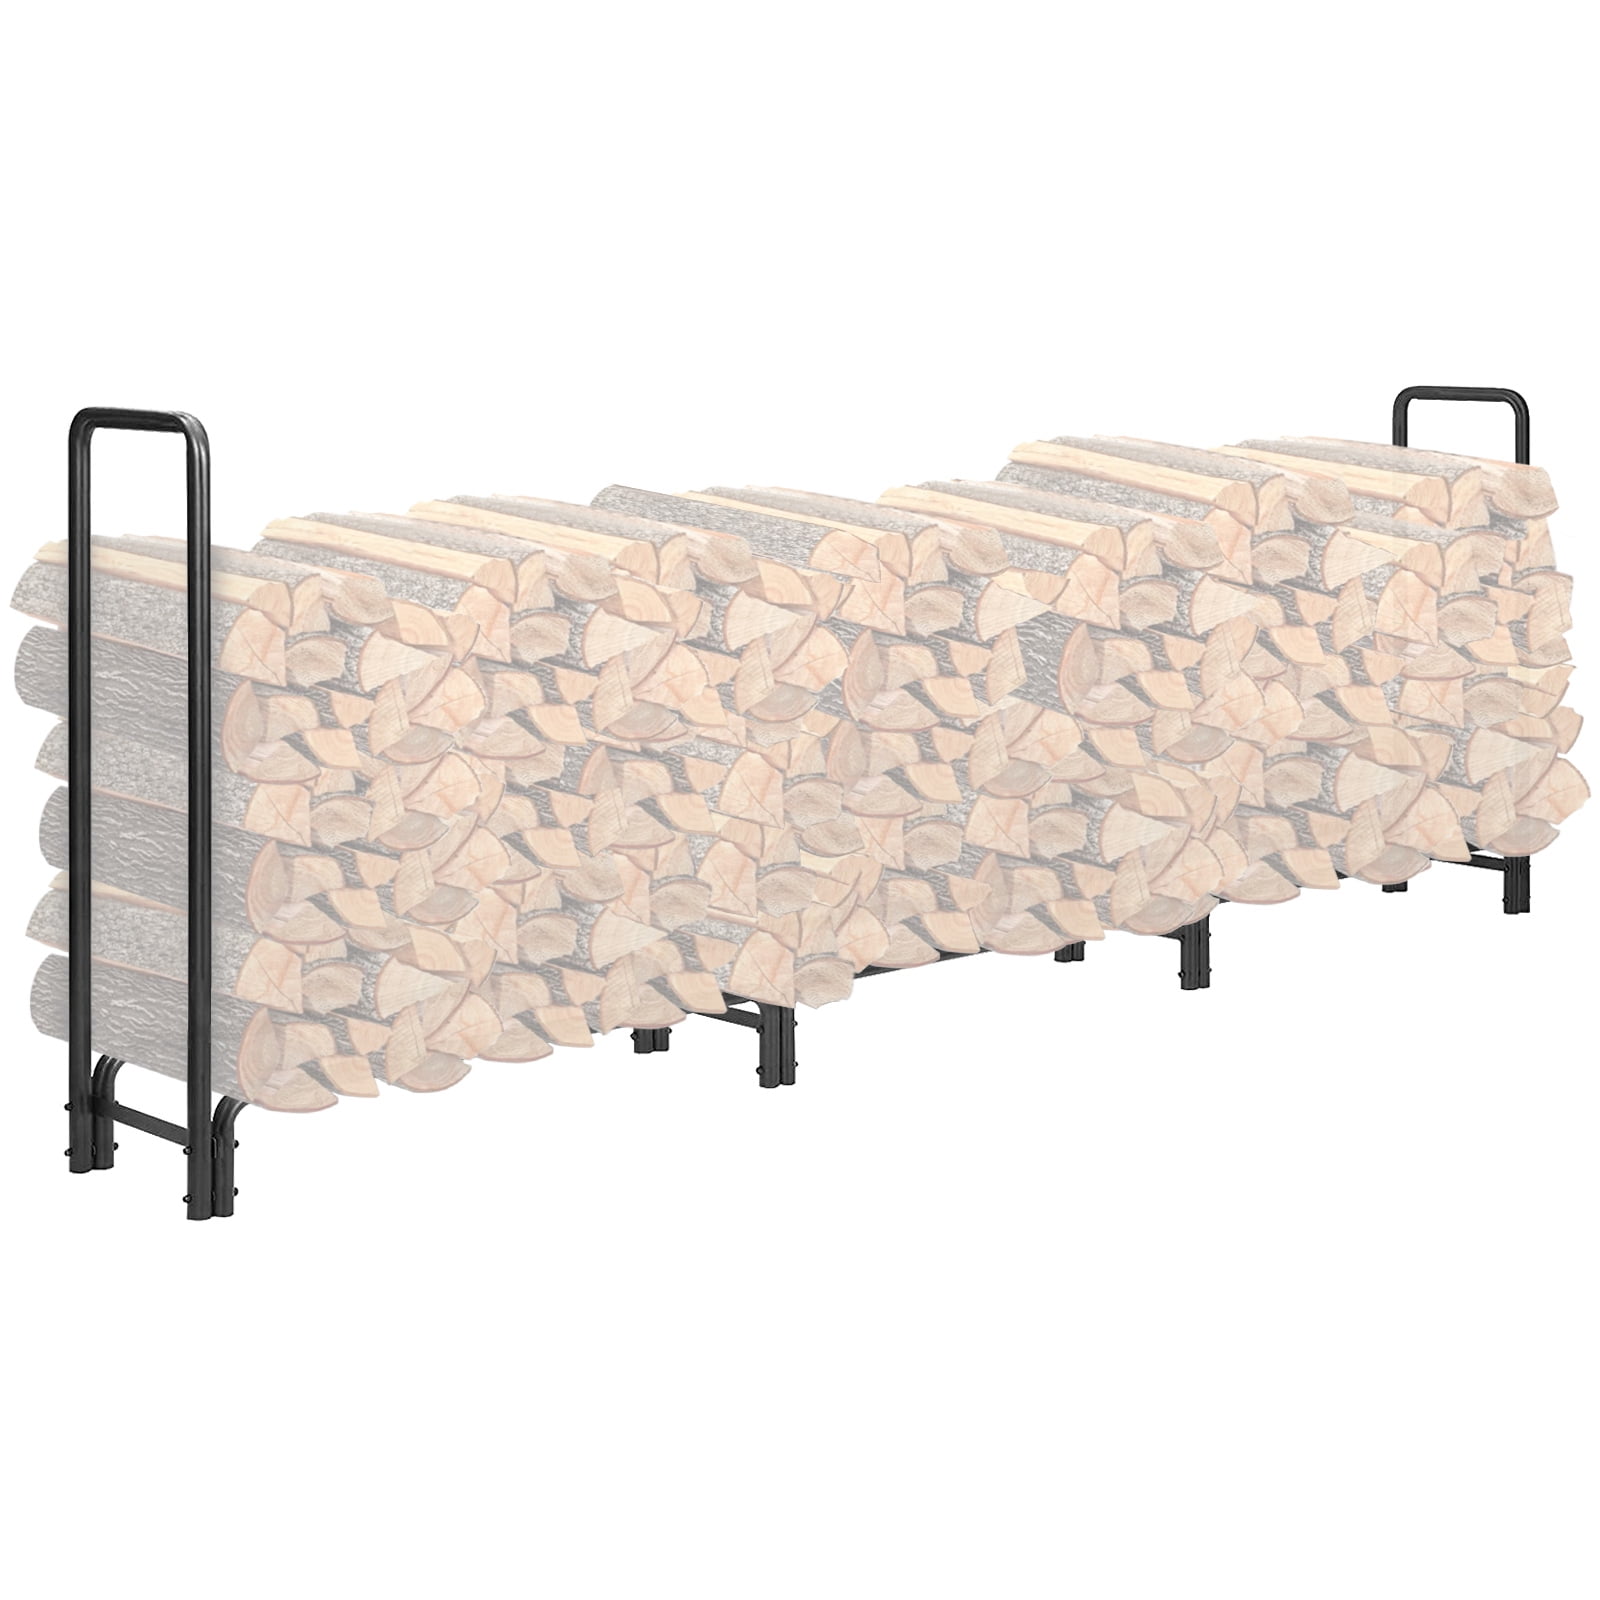 12 ft firewood rack with coversteel storage log holder outdoor heavy duty 